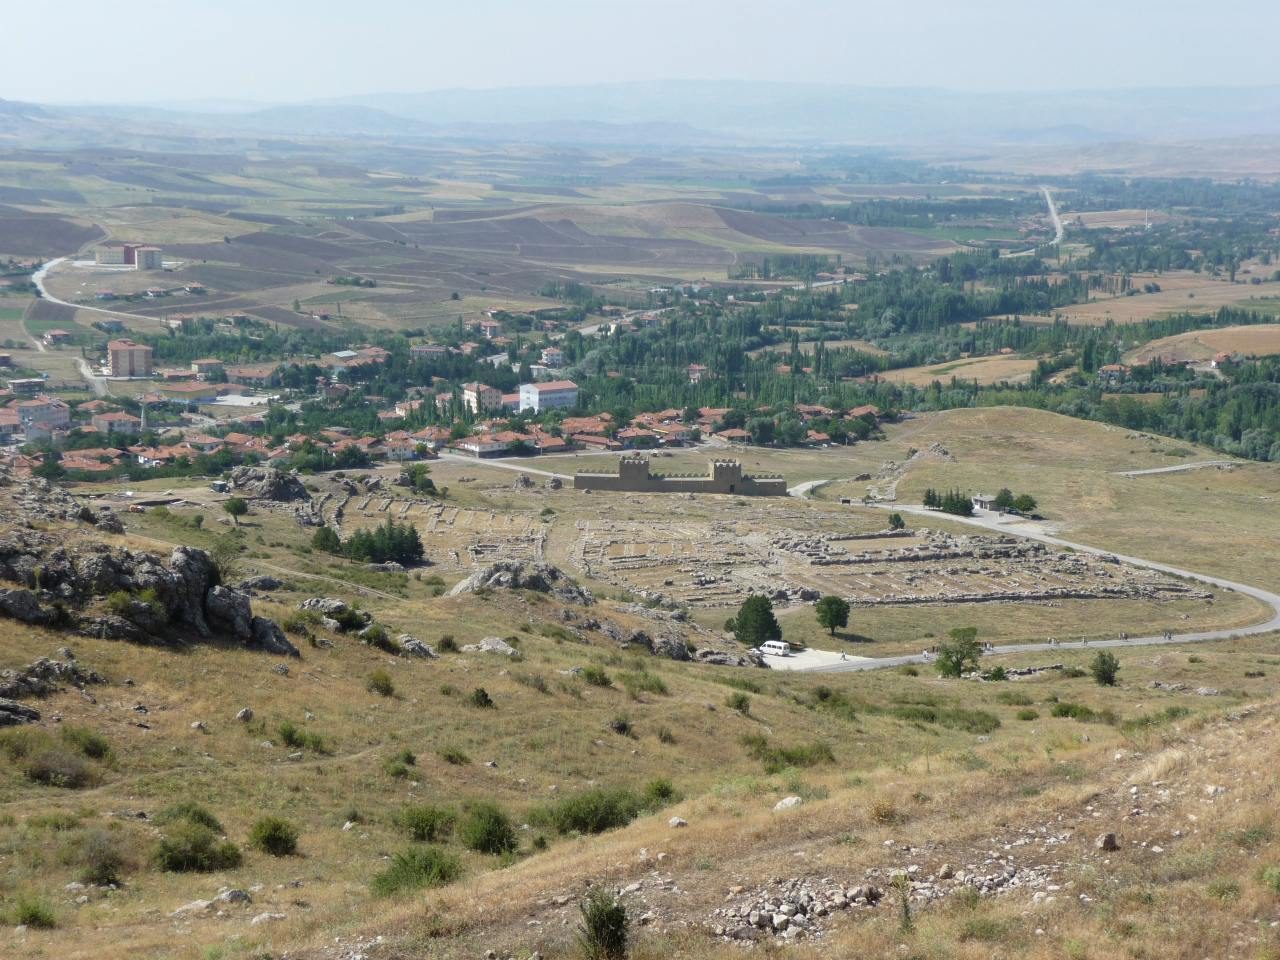 Tree study shows how drought may have doomed ancient Hittite empire